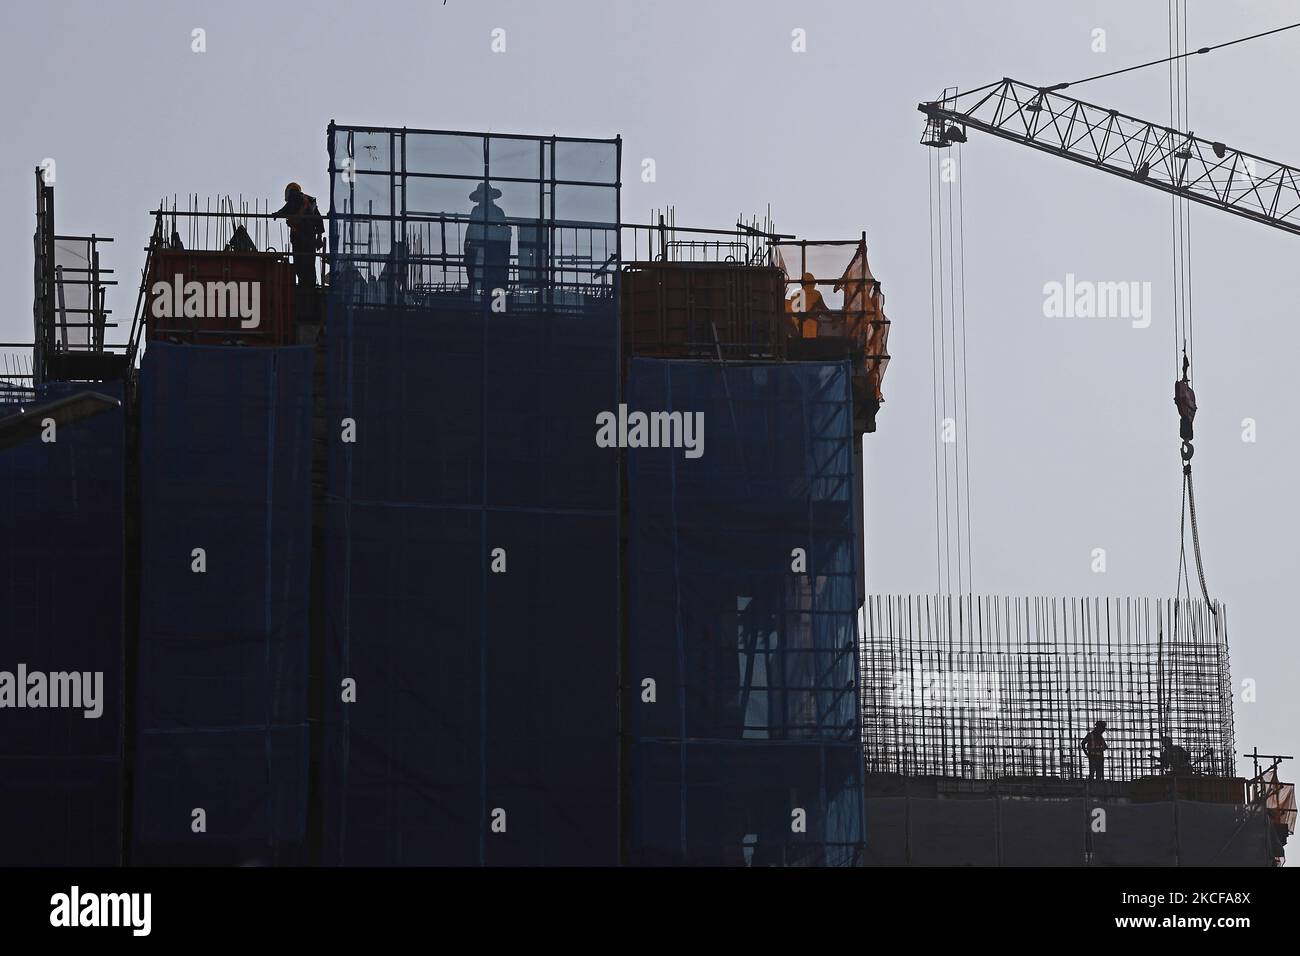 Migrant workers work at a building construction site on May 28, 2021 in Singapore. Singapore enters a month long heightened alert from May 16 to June 13 to curb the spread of COVID-19 cases in the local community. New restrictions on movements and activities have been introduced such as limiting social interaction to two, prohibiting dining out and a reduced operating capacity at shopping malls, offices and attractions. On May 17, the construction industry stakeholders appealed to Multi-Ministry Taskforce to bring in foreign workers in a safe and controlled manner after the built environment i Stock Photo